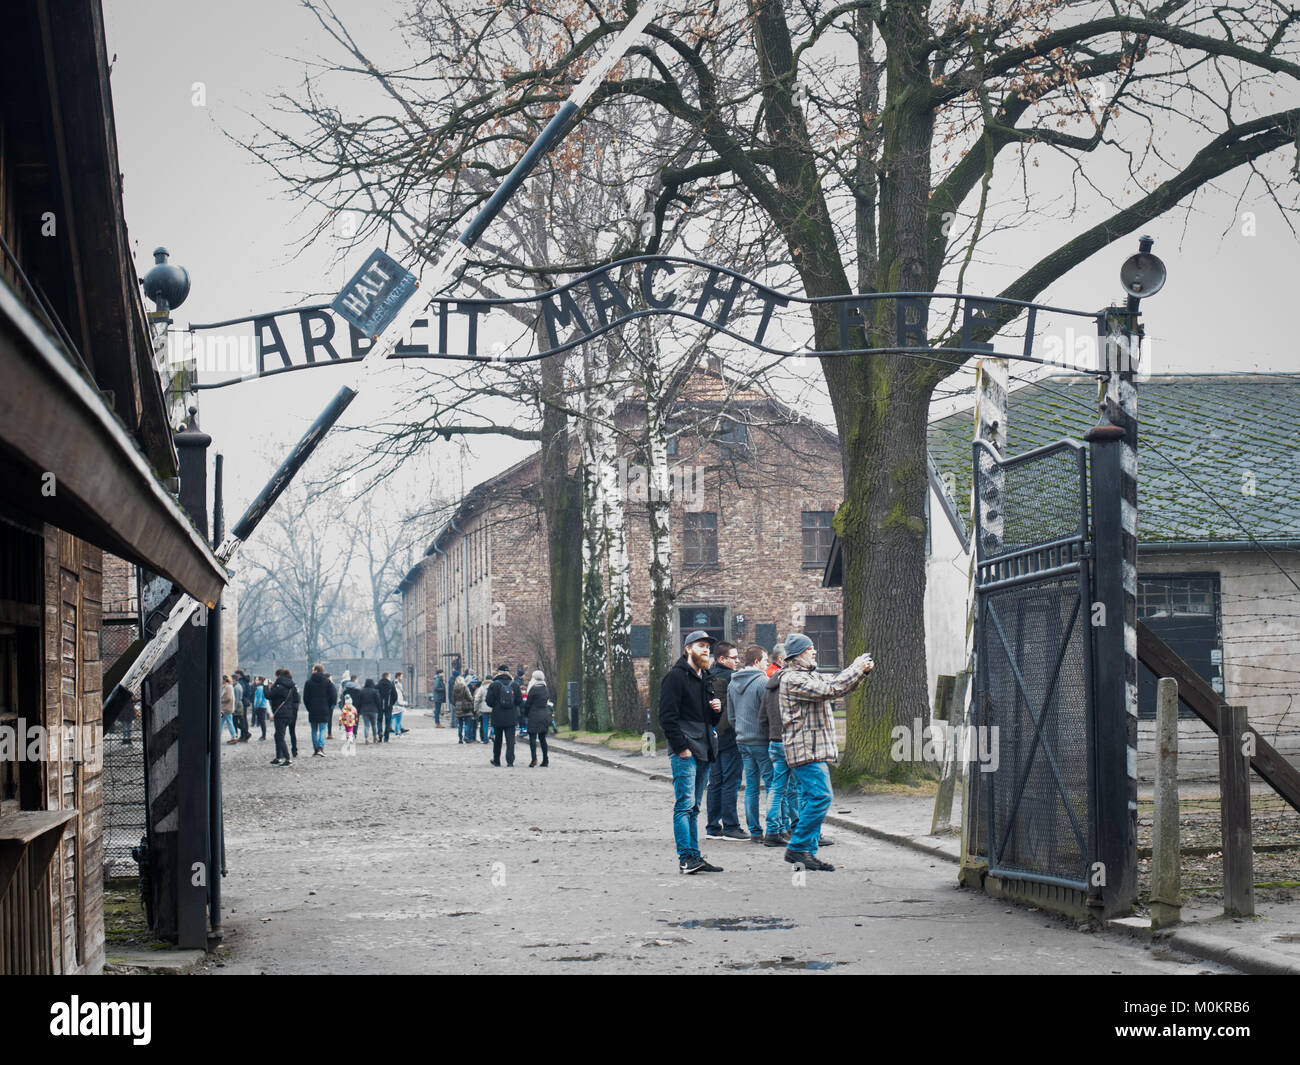 Arbeit Macht Frei sign at entrance to Auschwitz Concentration Camp, near Krakow, Poland Stock Photo